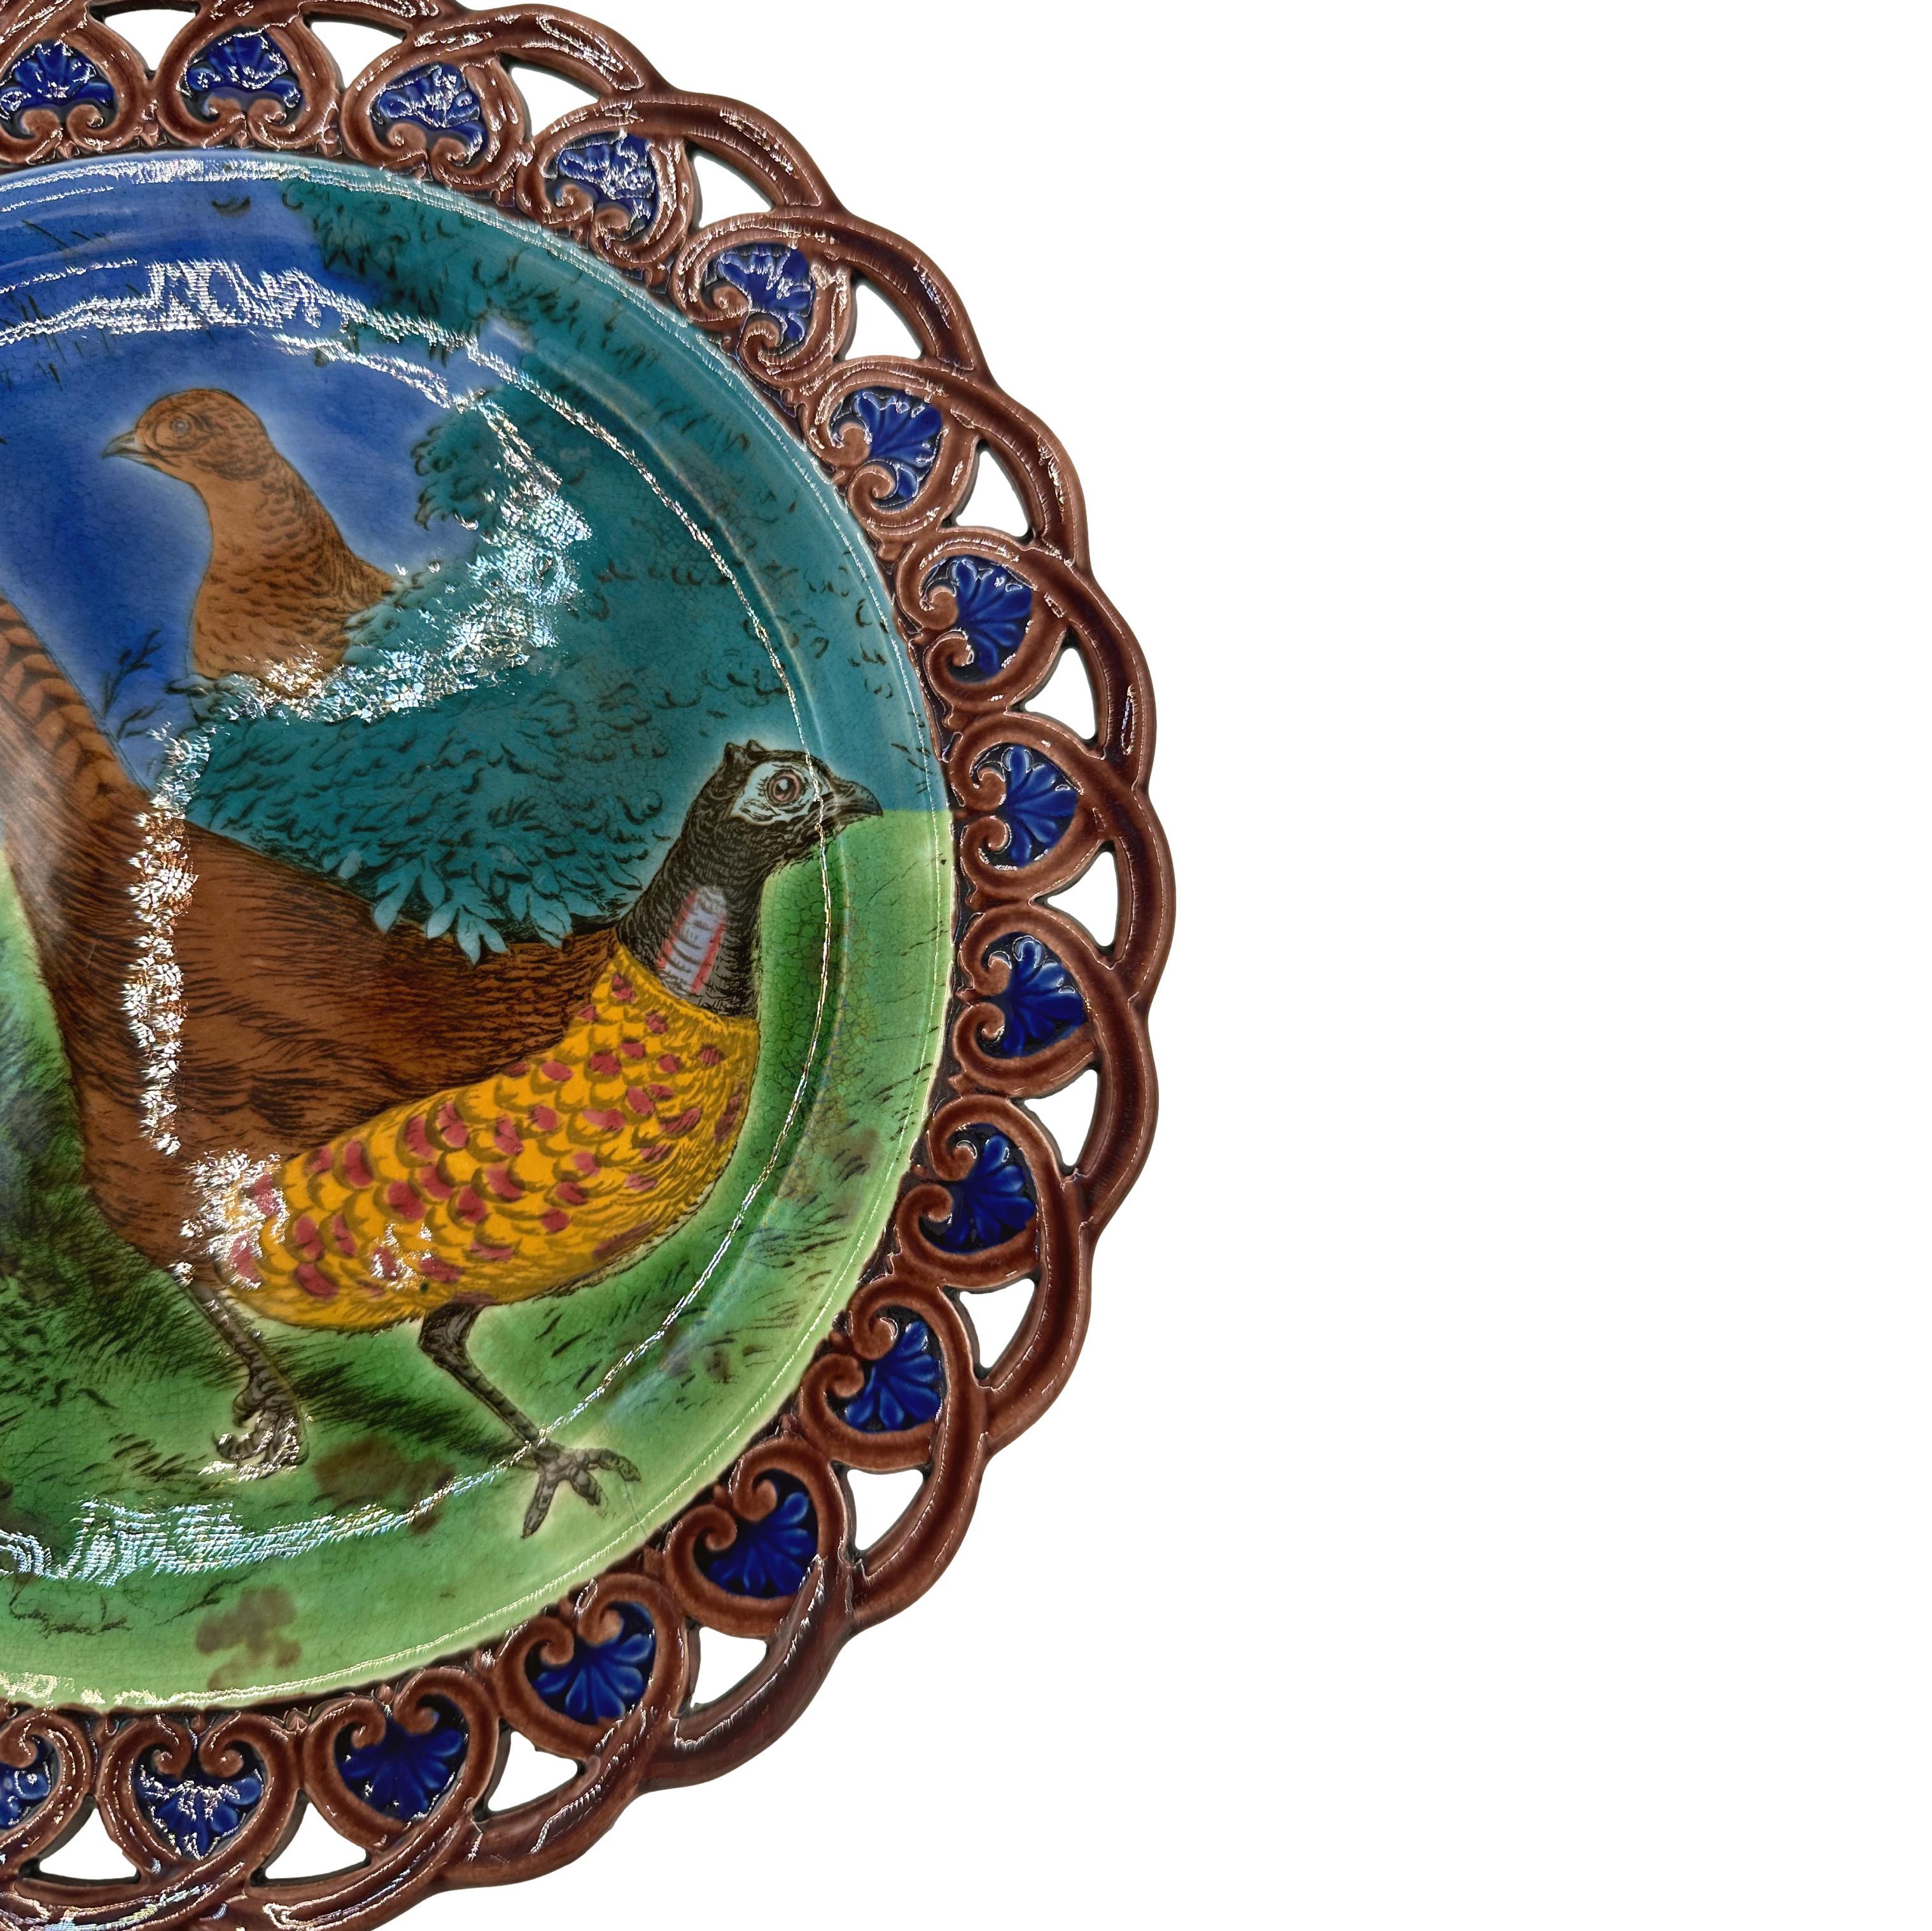 Molded A Wedgwood Majolica Pheasants Game Cabinet Plate, Reticulated, English, 1877 For Sale